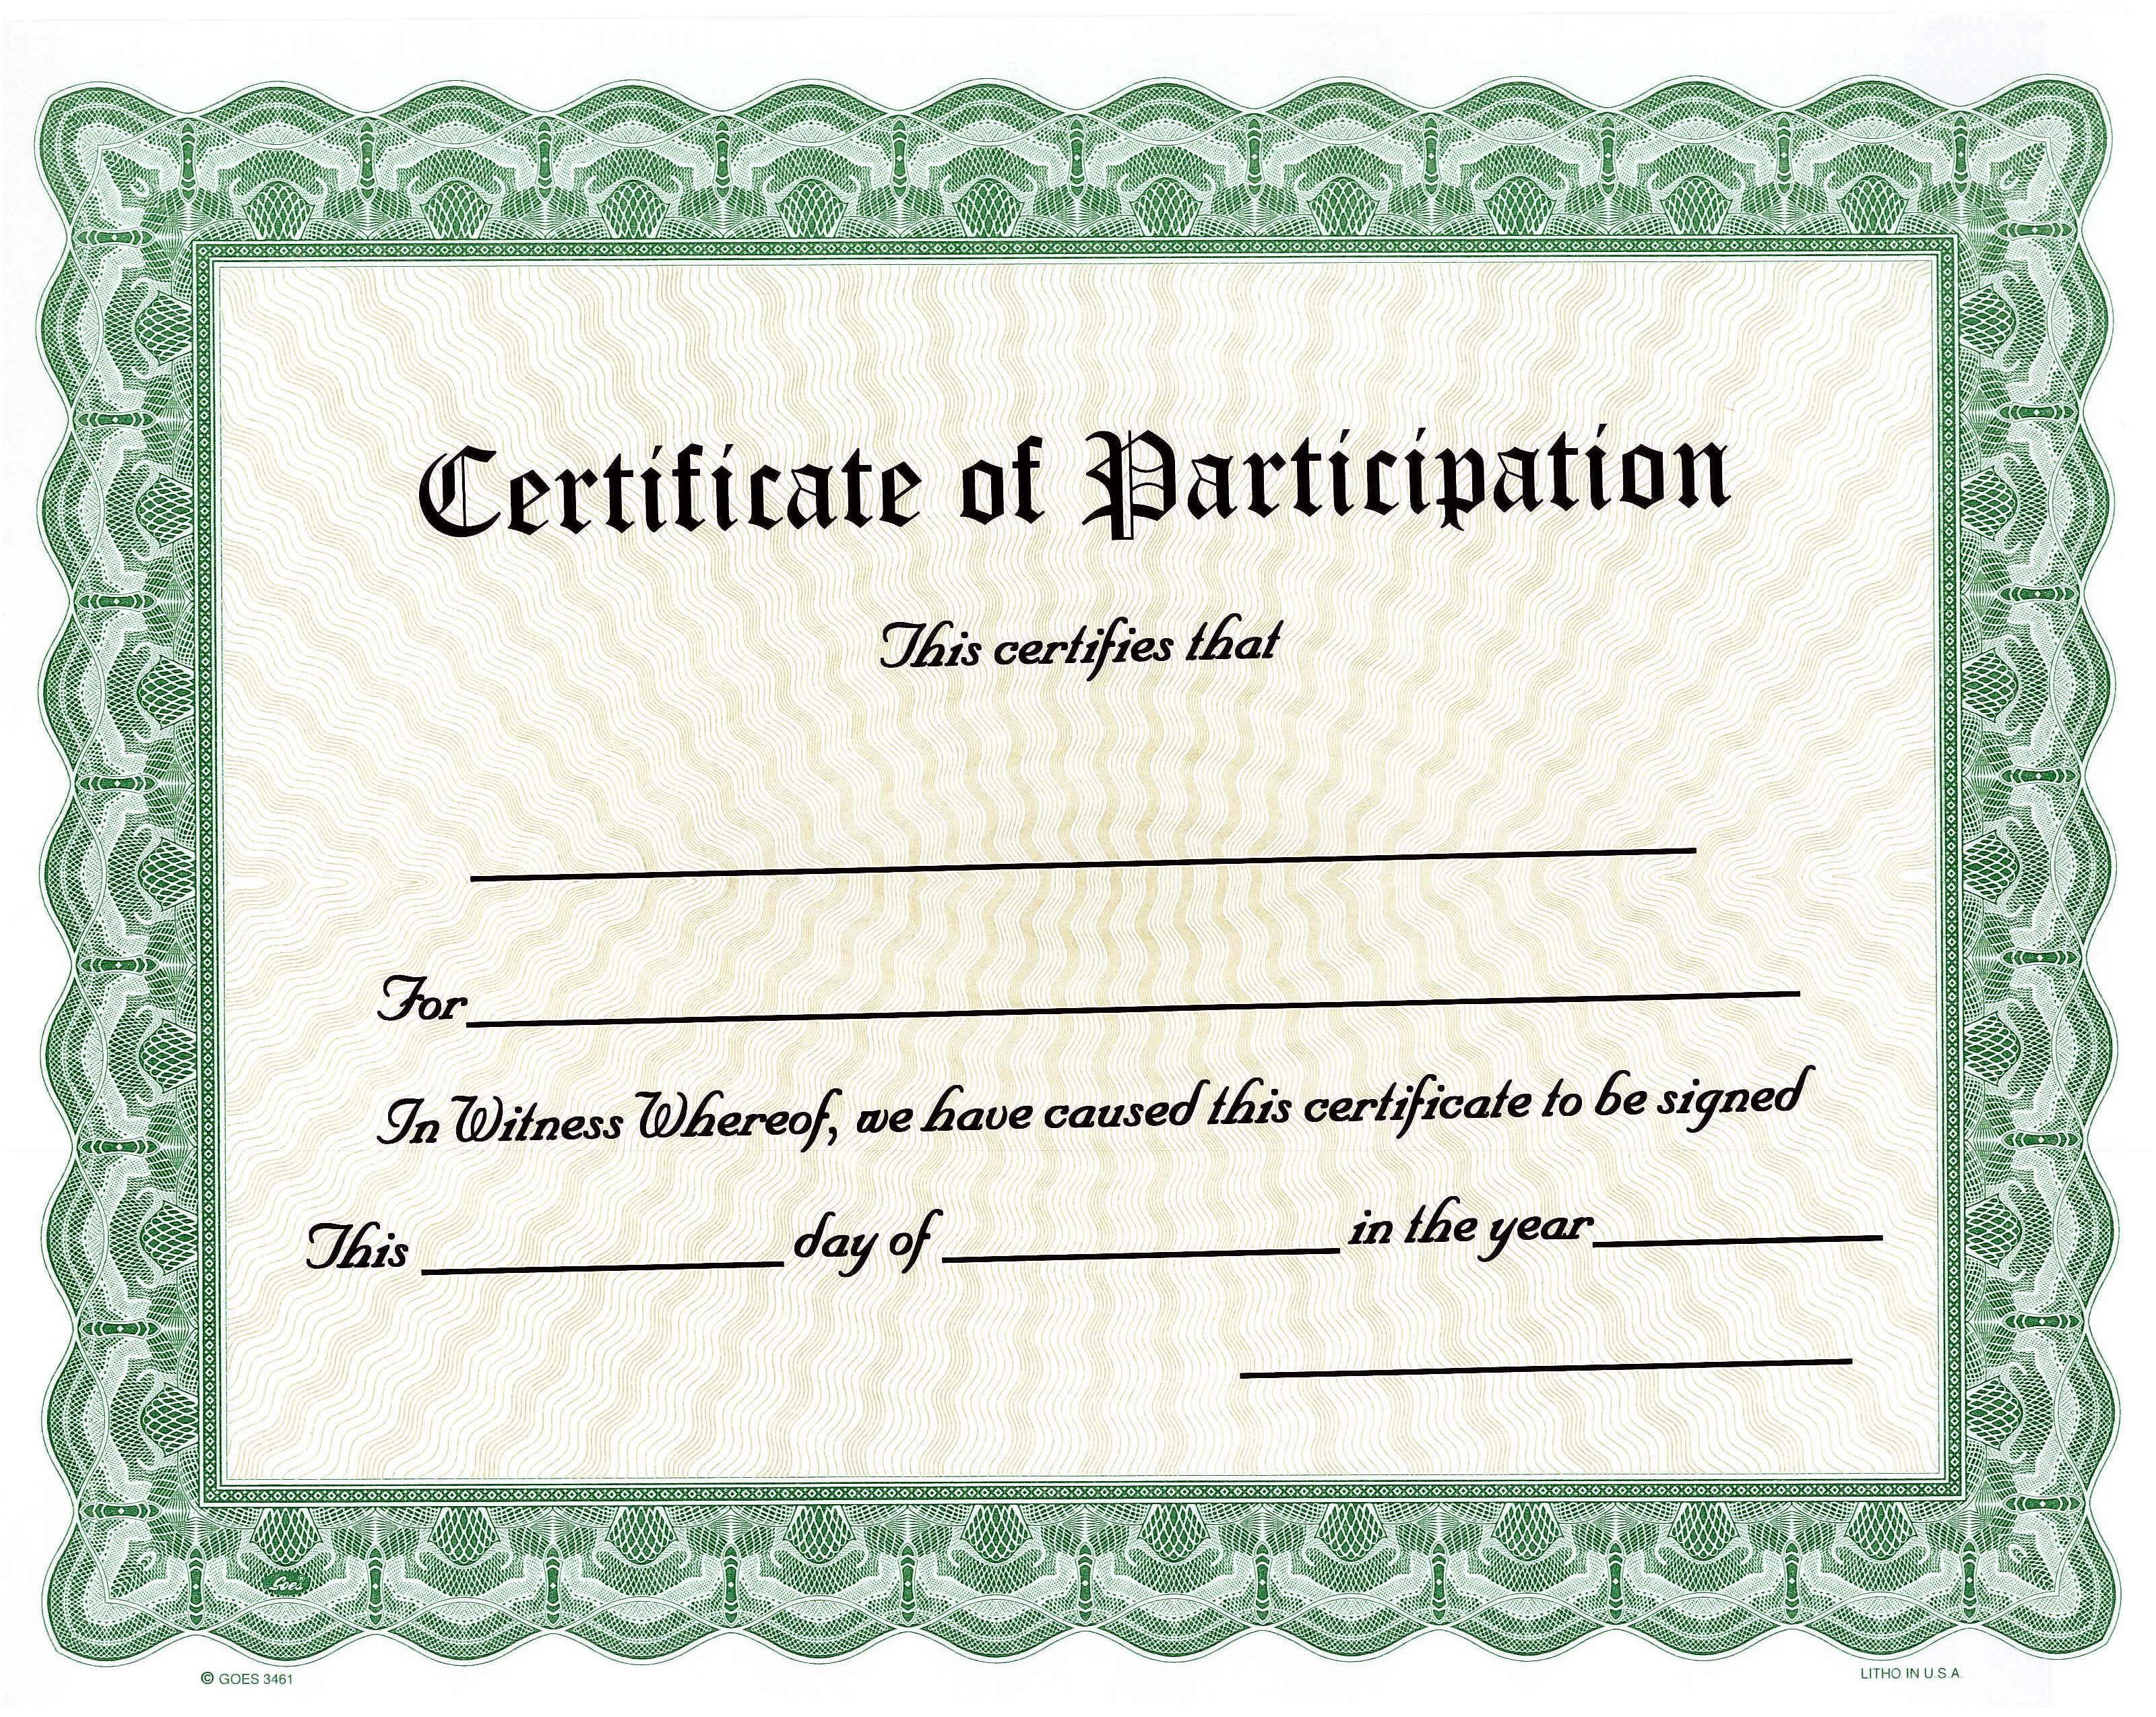 Participation Certificate - Blank